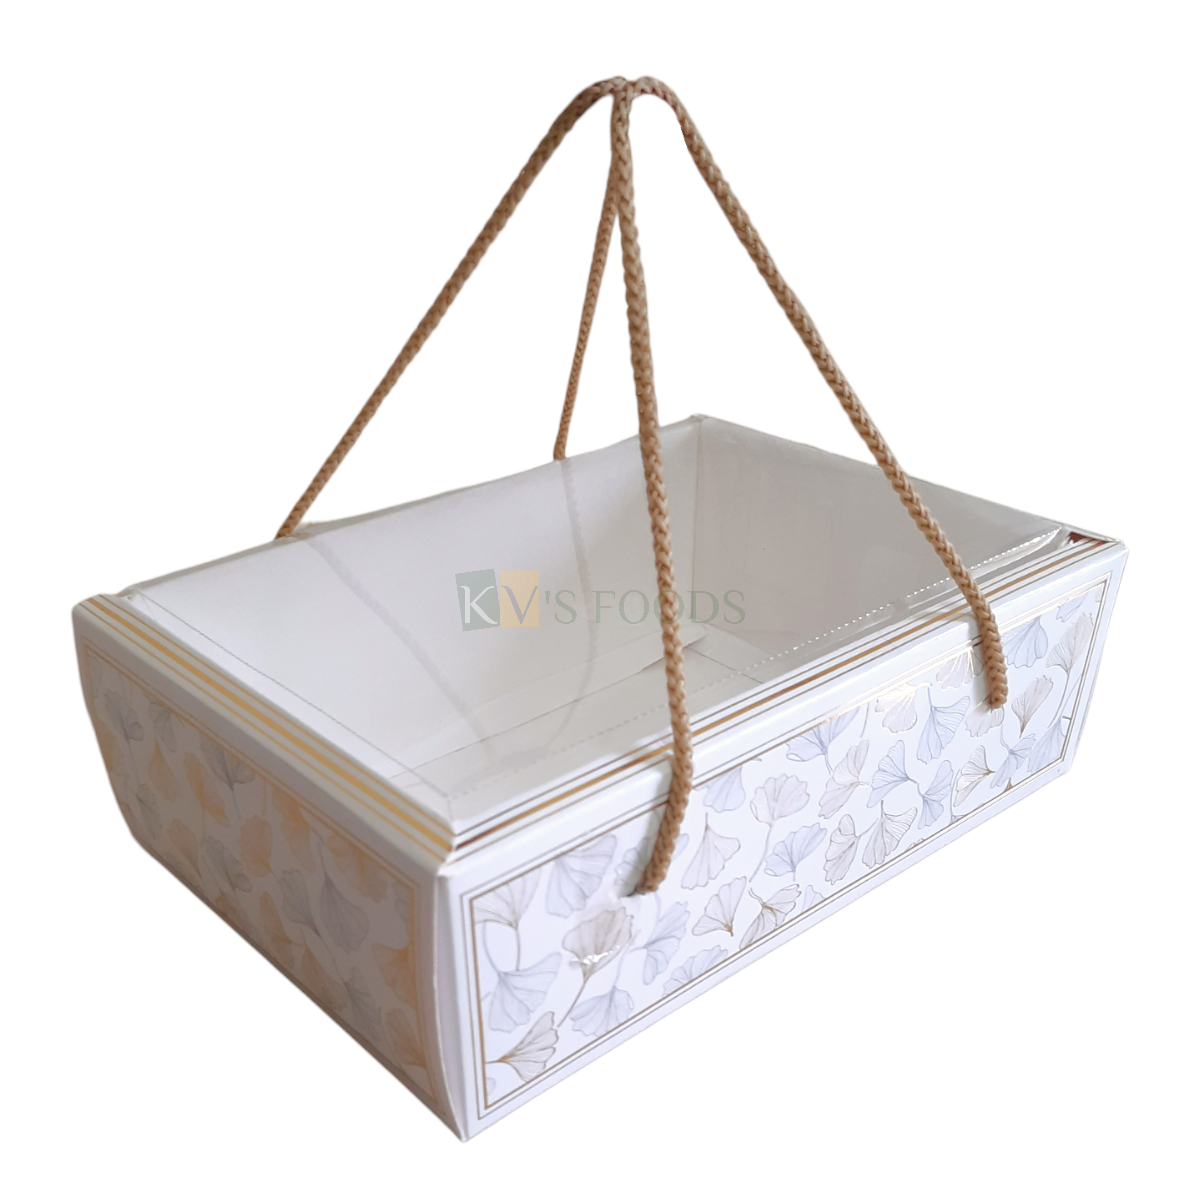 1 PC Golden And Grey Colour Ginkgo Leaves Printed Multipurpose White Chocolate Hamper Box with Transparent Window Box Size 11.9*7.7*3.5 Inch Premium Gift Hamper Bags with Clear Lid and Rope Handle